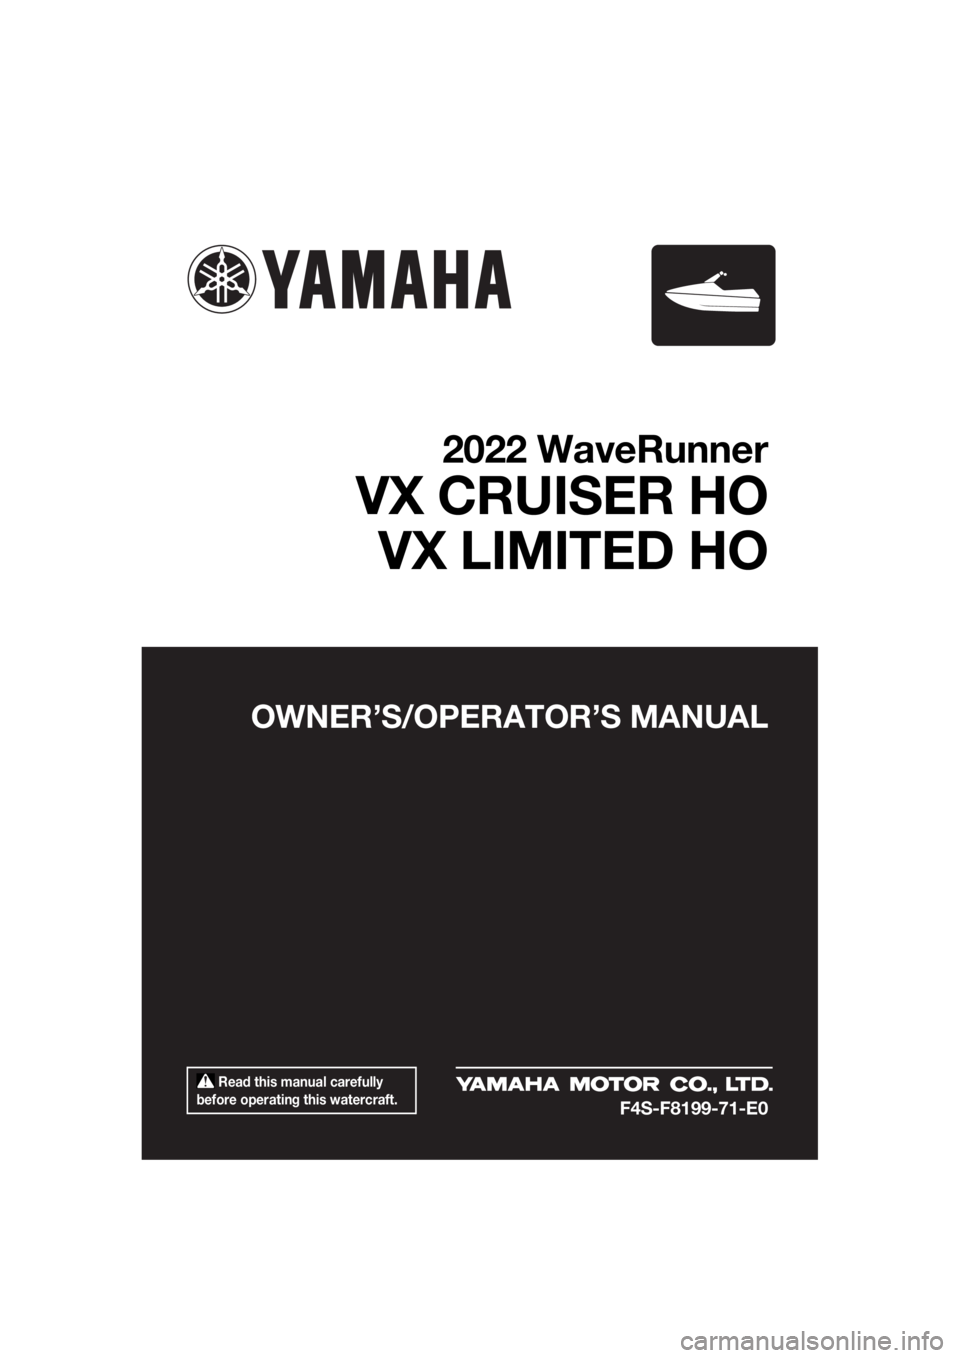 YAMAHA VX CRUISER HO 2022  Owners Manual  Read this manual carefully 
before operating this watercraft.
OWNER’S/OPERAT OR’S MANUAL
2022 WaveRunner
VX CRUISER HO
VX LIMITED HO
F4S-F8199-71-E0
UF4S71E0.book  Page 1  Wednesday, August 4, 20